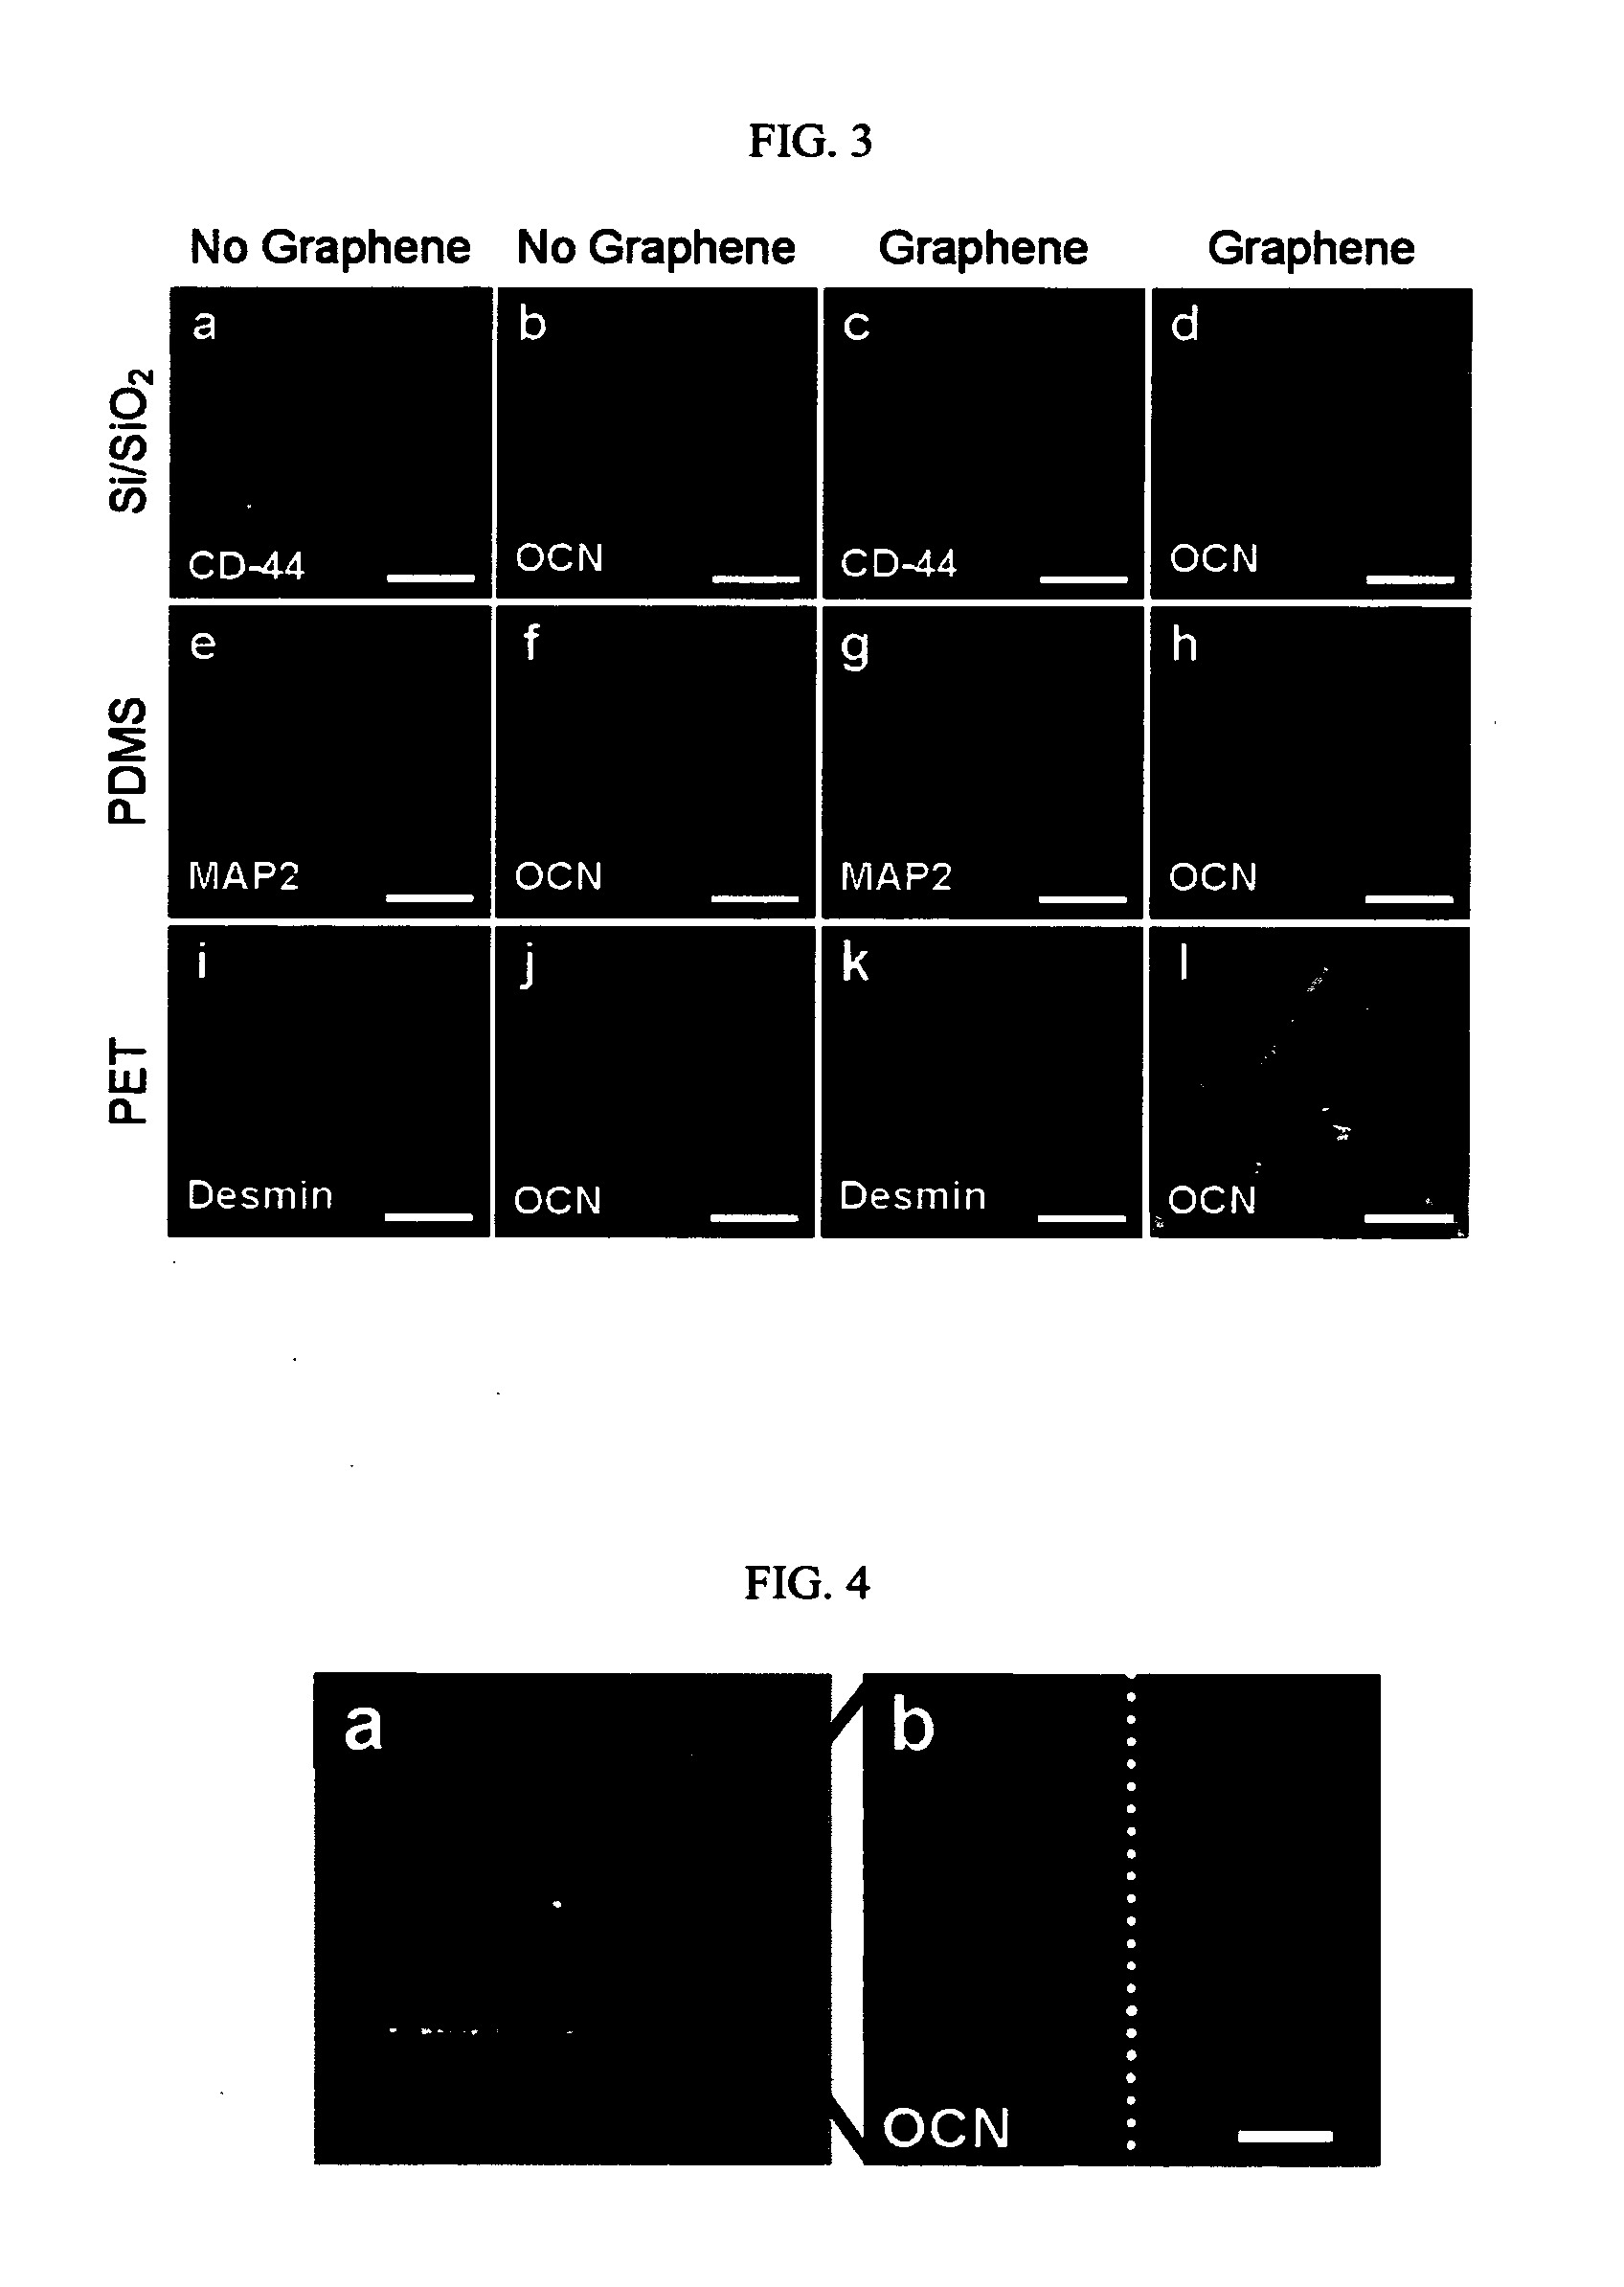 Method For Controlling And Accelerating Differentiation Of Stem Cells Using Graphene Substrates